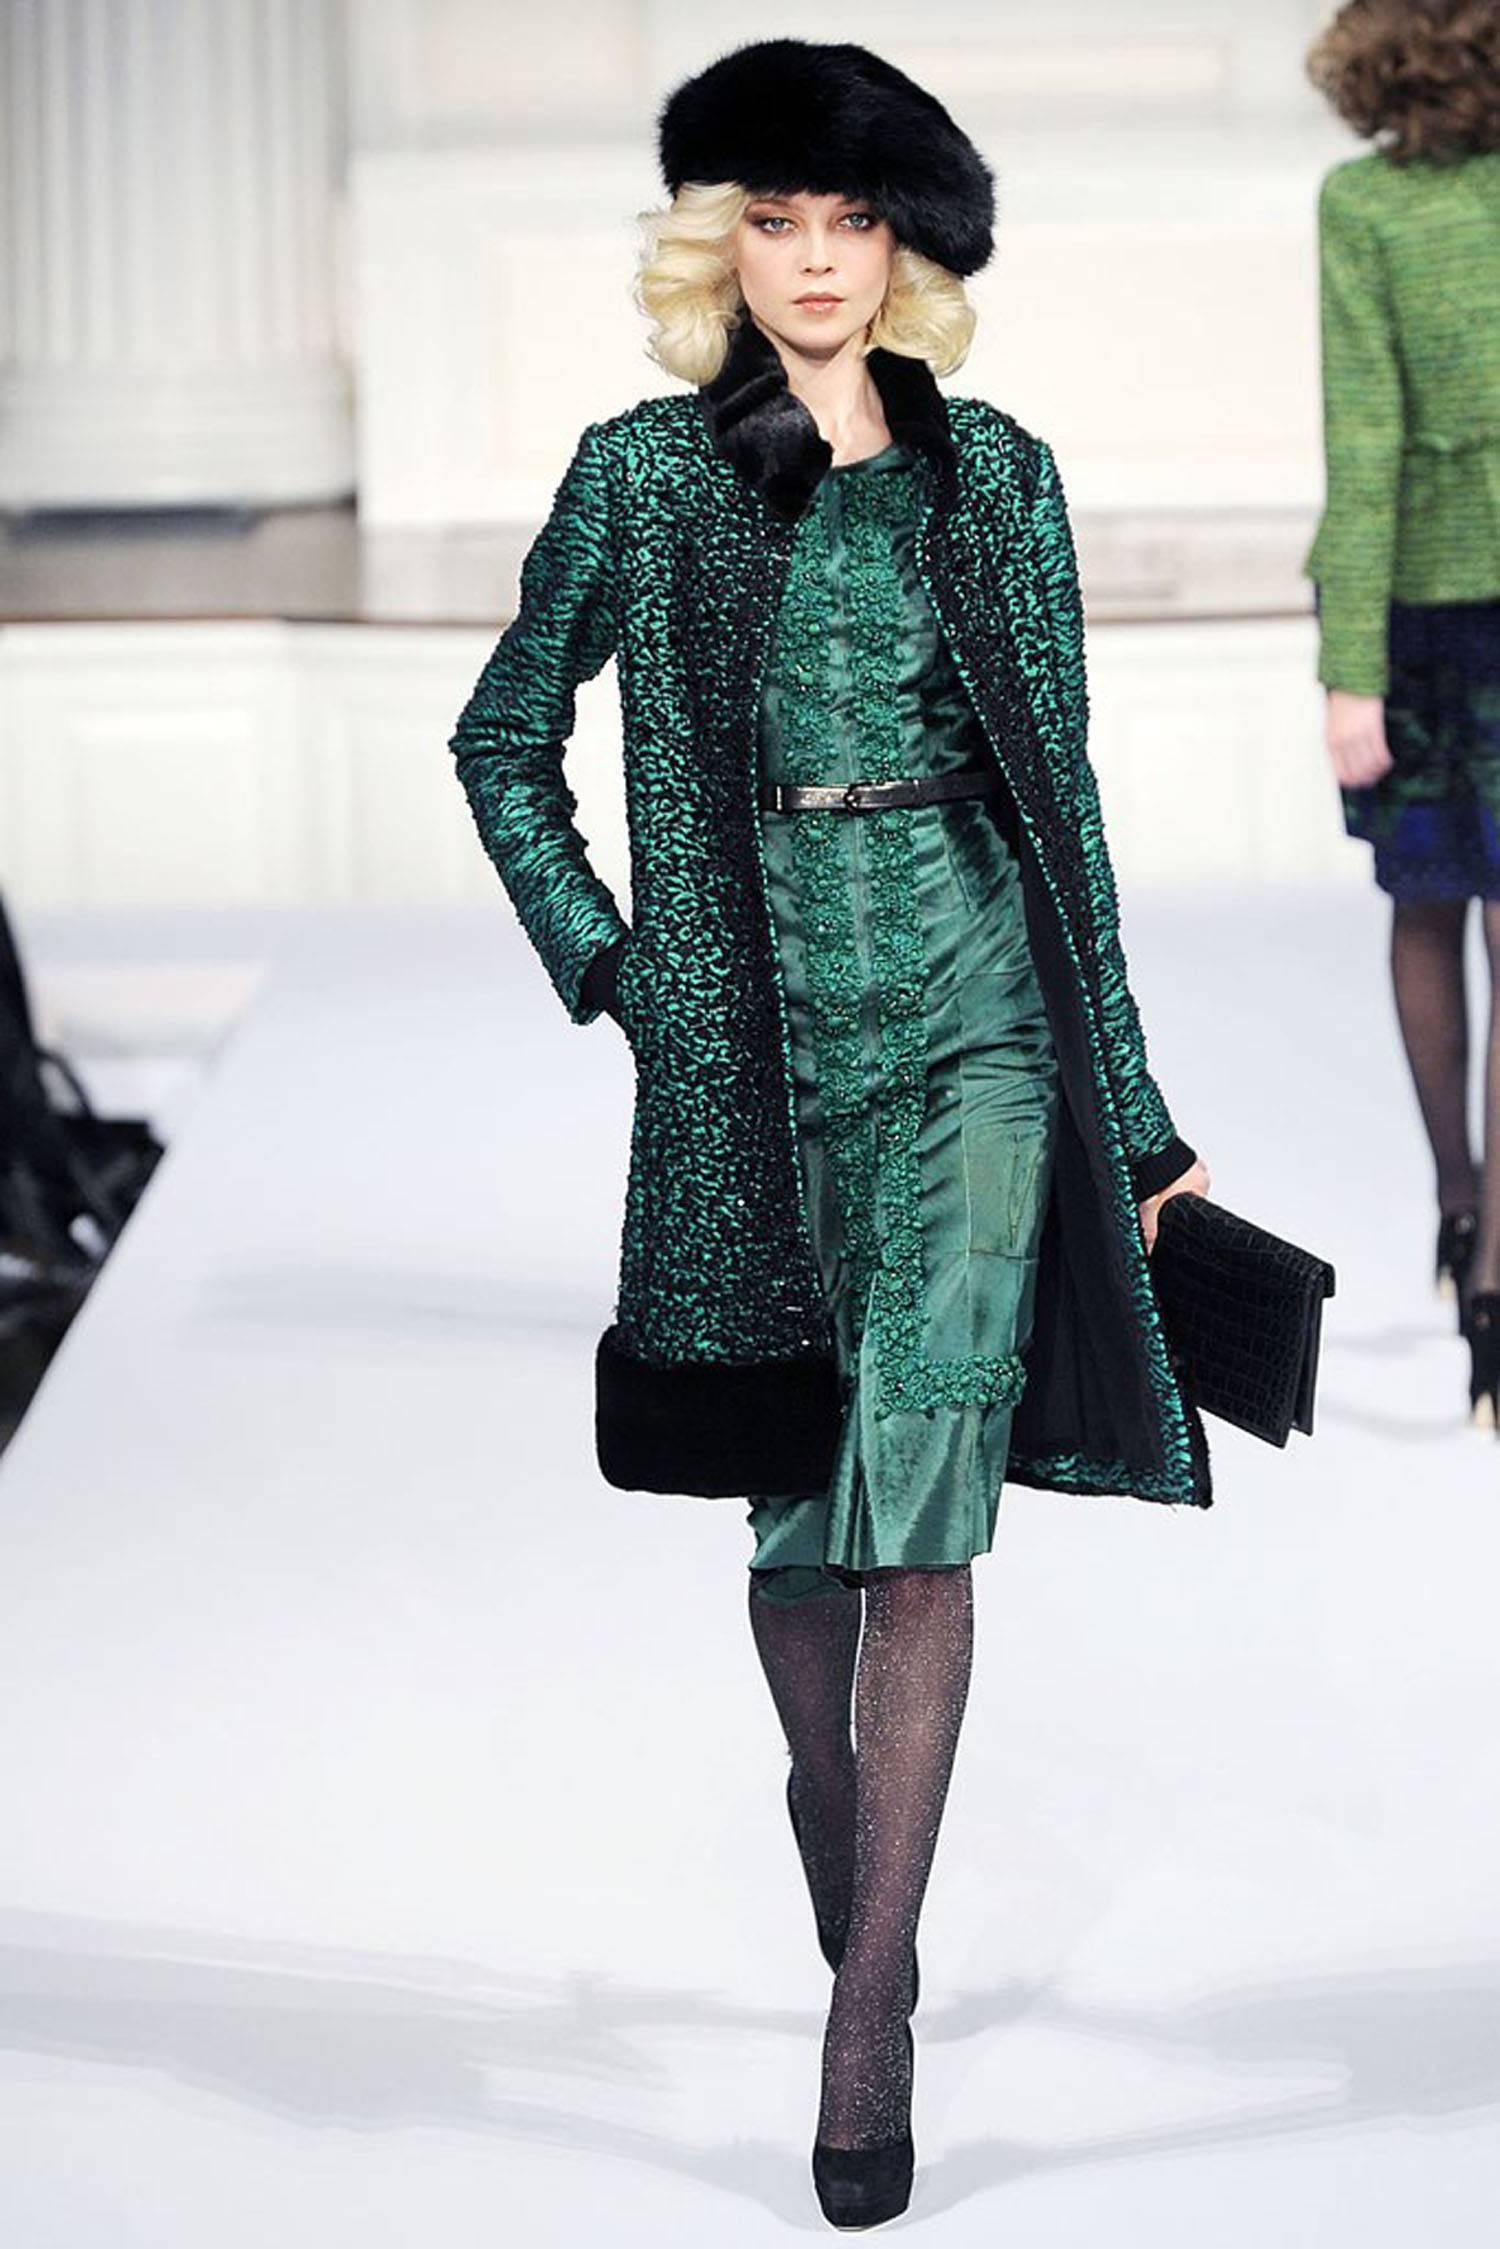 New Oscar de la Renta Mink Boucle Embellished Coat
Designer size 8 (will fit different sizes also)
Colors - Emerald Green and Black
Mink trim at collar and hem, Beaded at front and around hem, fully lined, two side pockets, open style.
Measurements: